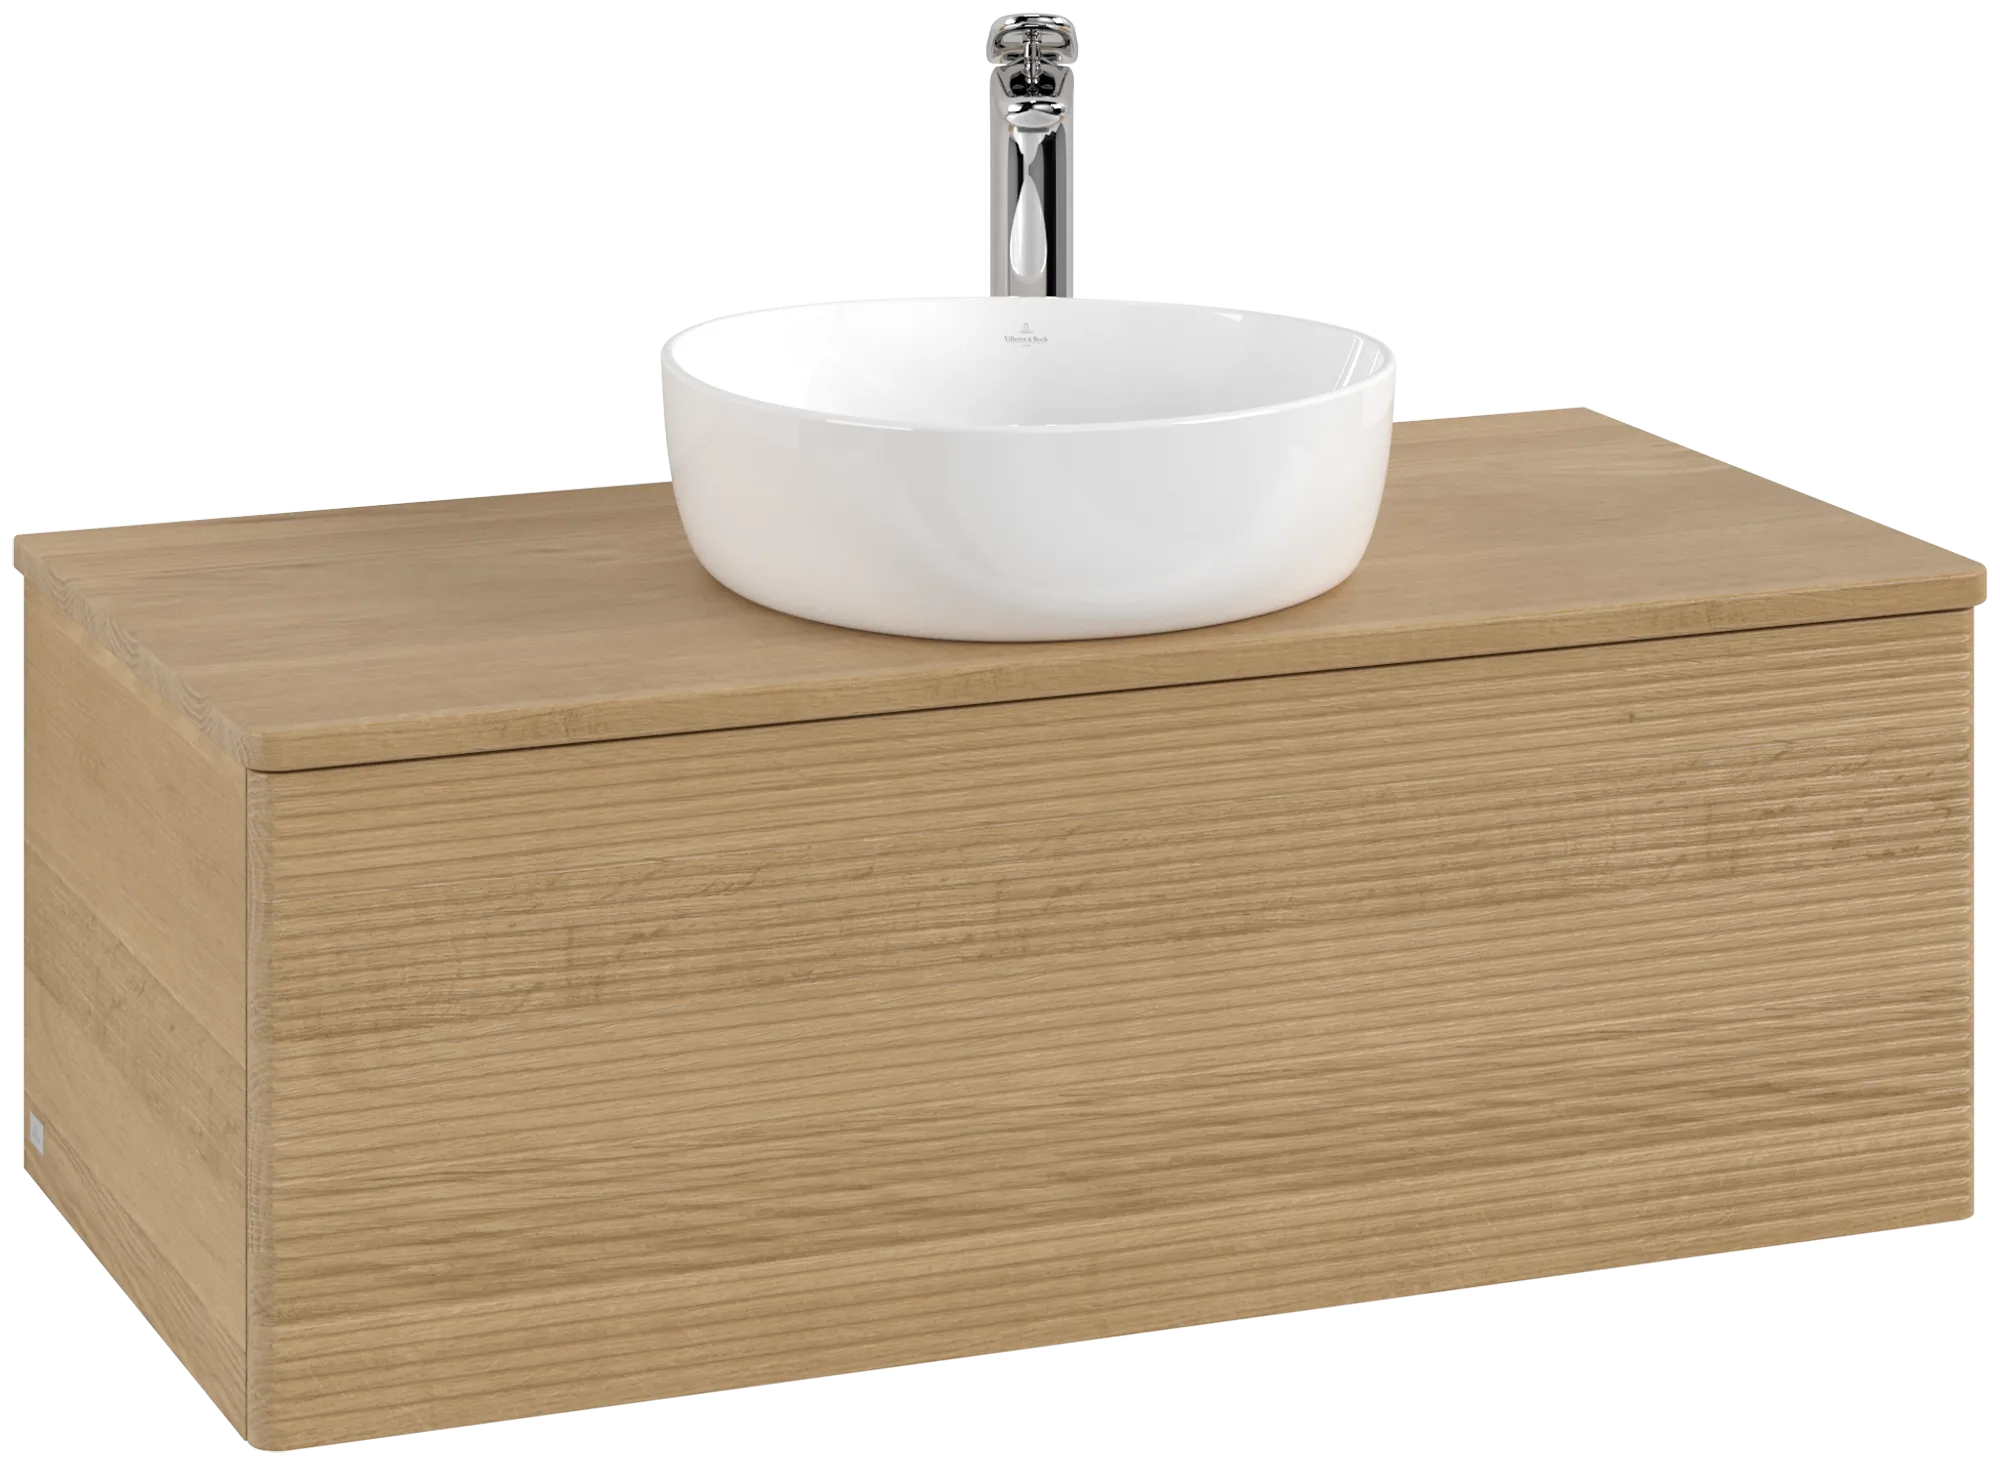 Picture of VILLEROY BOCH Antao Vanity unit, with lighting, 1 pull-out compartment, 1000 x 360 x 500 mm, Front with grain texture, Honey Oak / Honey Oak #L31151HN